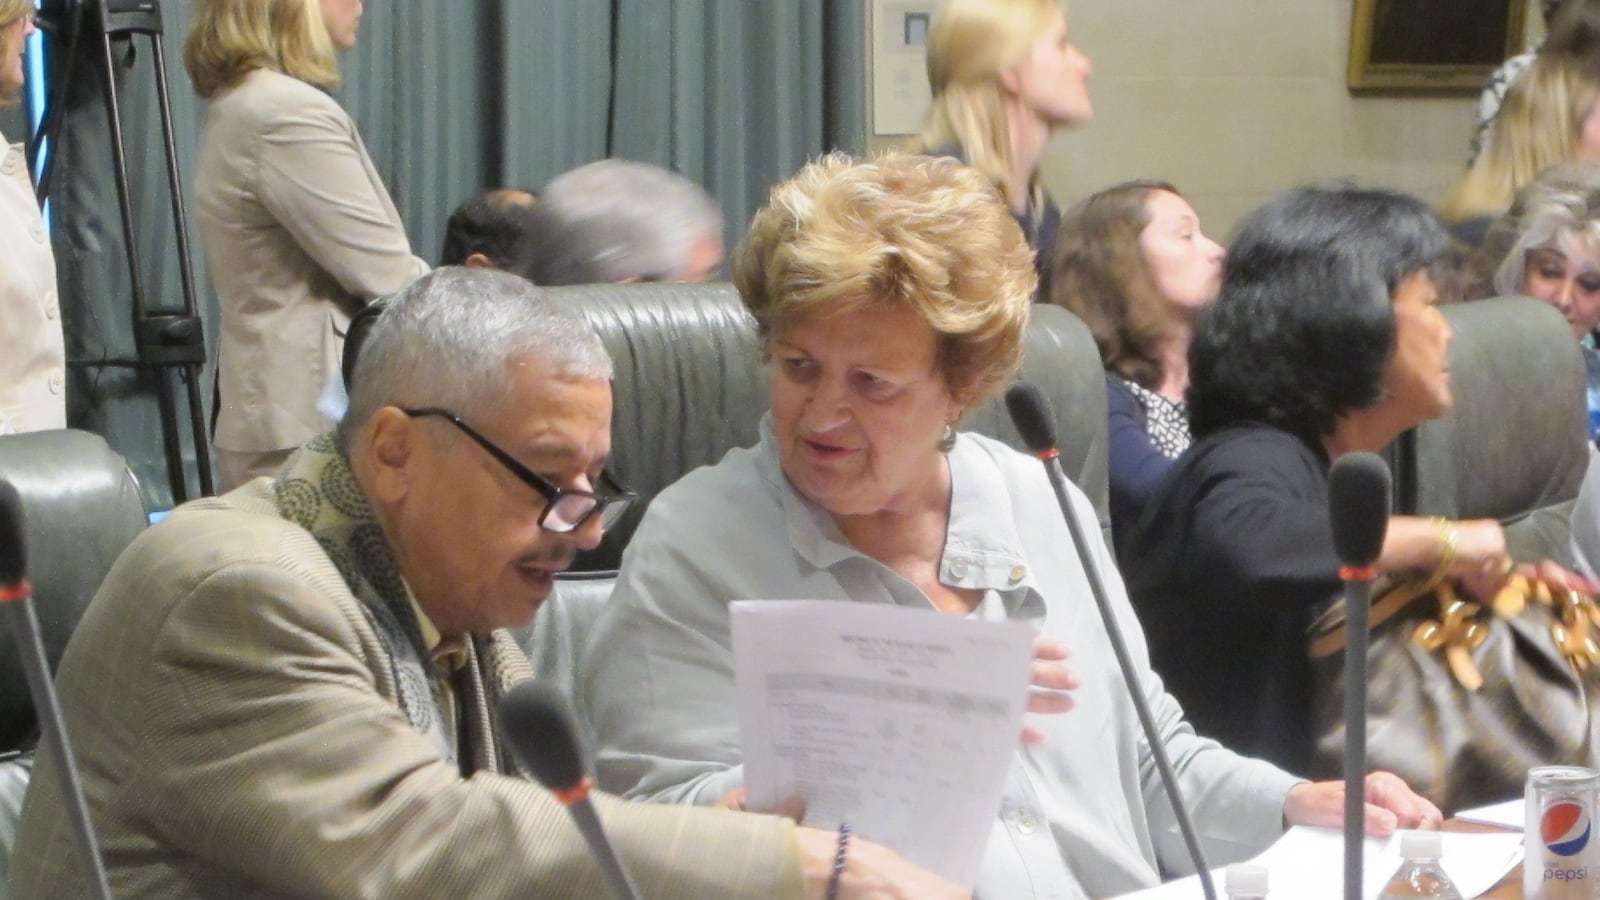 Regents Luis Reyes and Beverly Ouderkirk go over some paperwork at July's Board of Regents meeting.